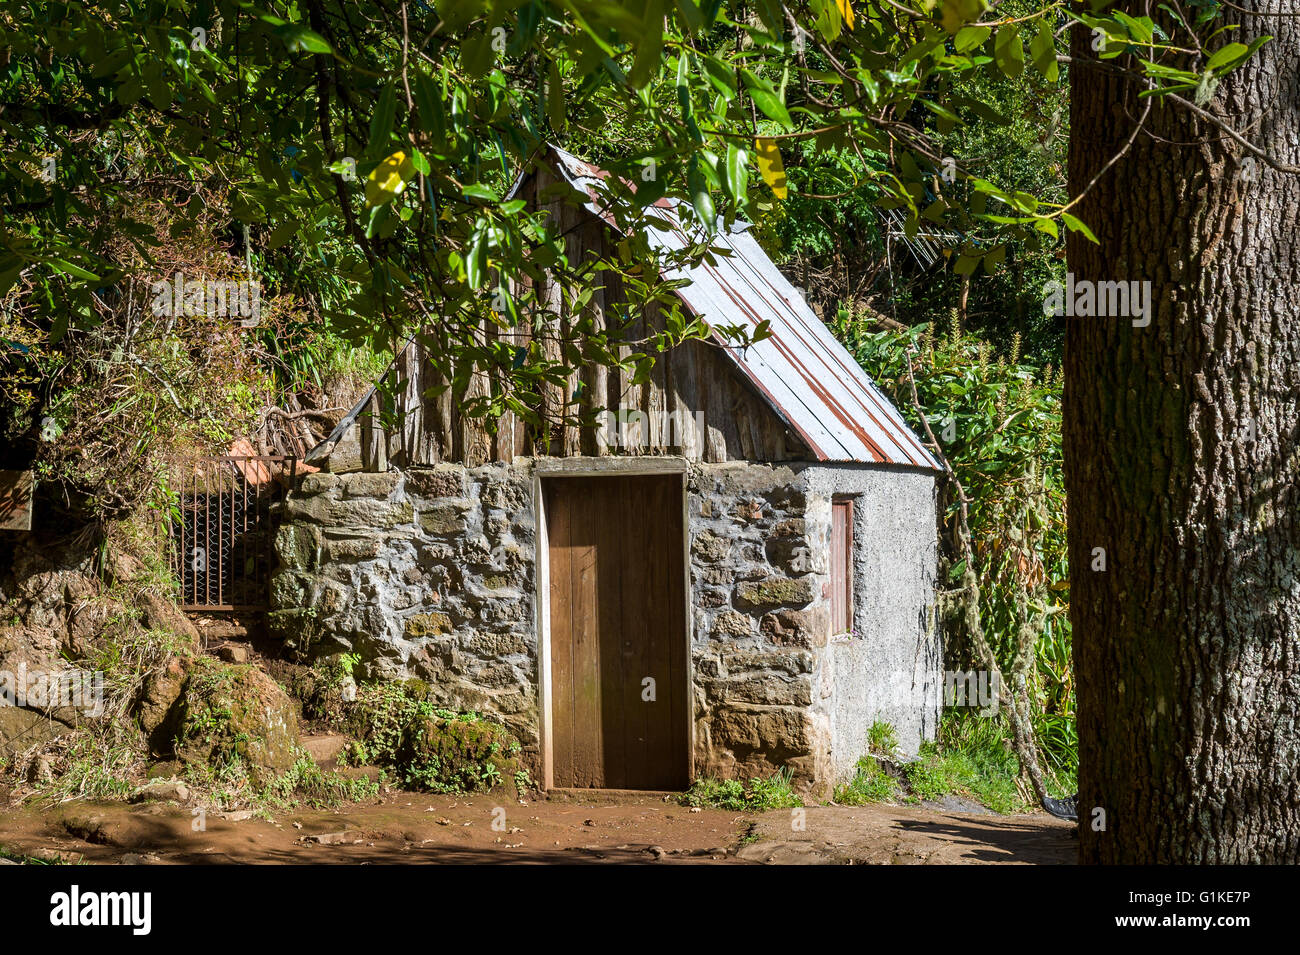 Stone house in the Balcoes hiking route in the rain forests of Madeira Stock Photo